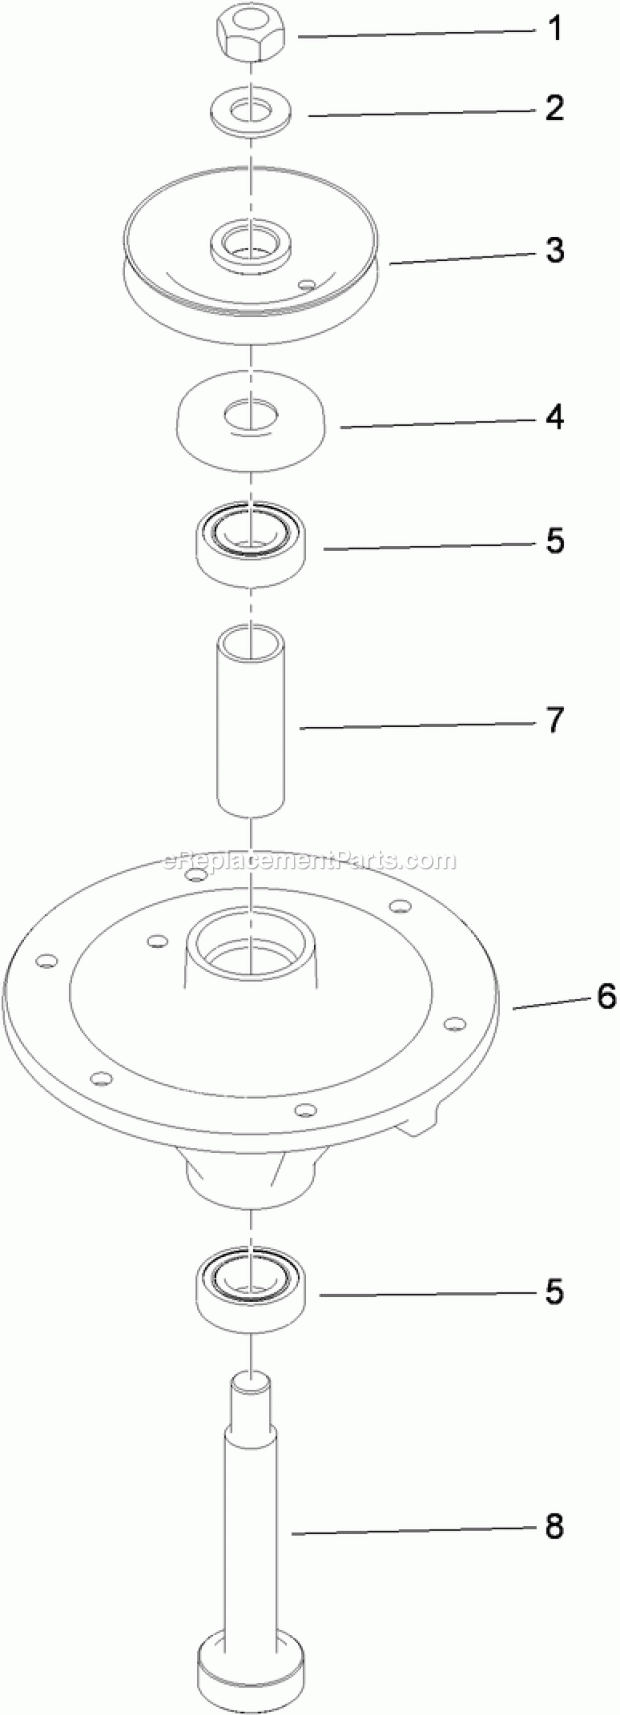 Toro 74536 (312000001-312999999) Grandstand Mower, With 40in Turbo Force Cutting Unit, 2012 Spindle Assembly No. 117-7635 Diagram